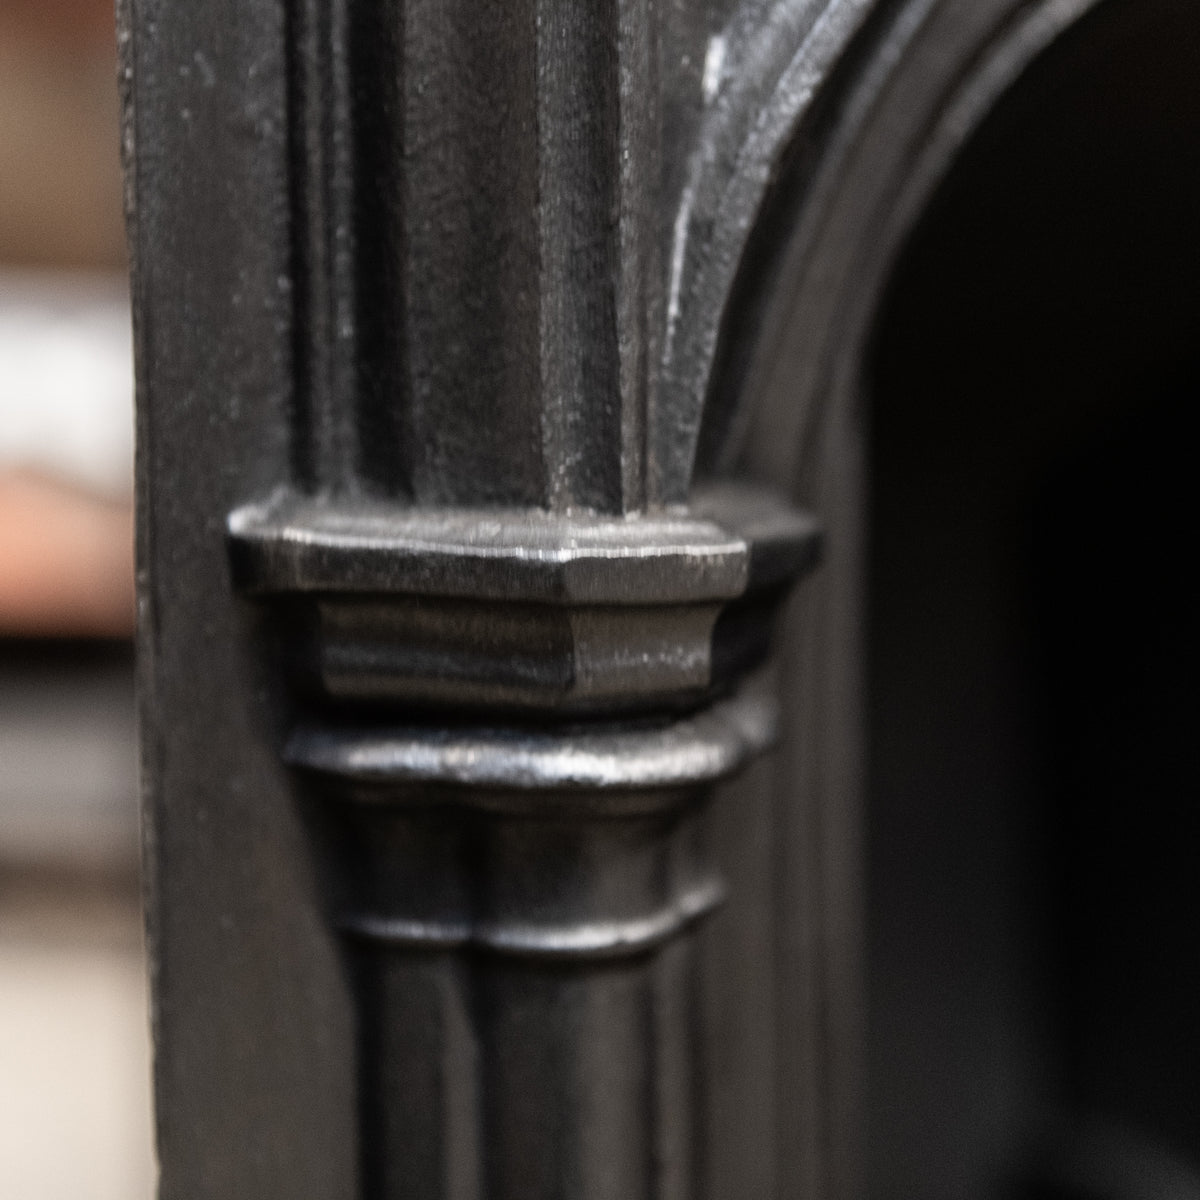 Antique Victorian Gothic Revival Cast Iron Fireplace Insert | The Architectural Forum